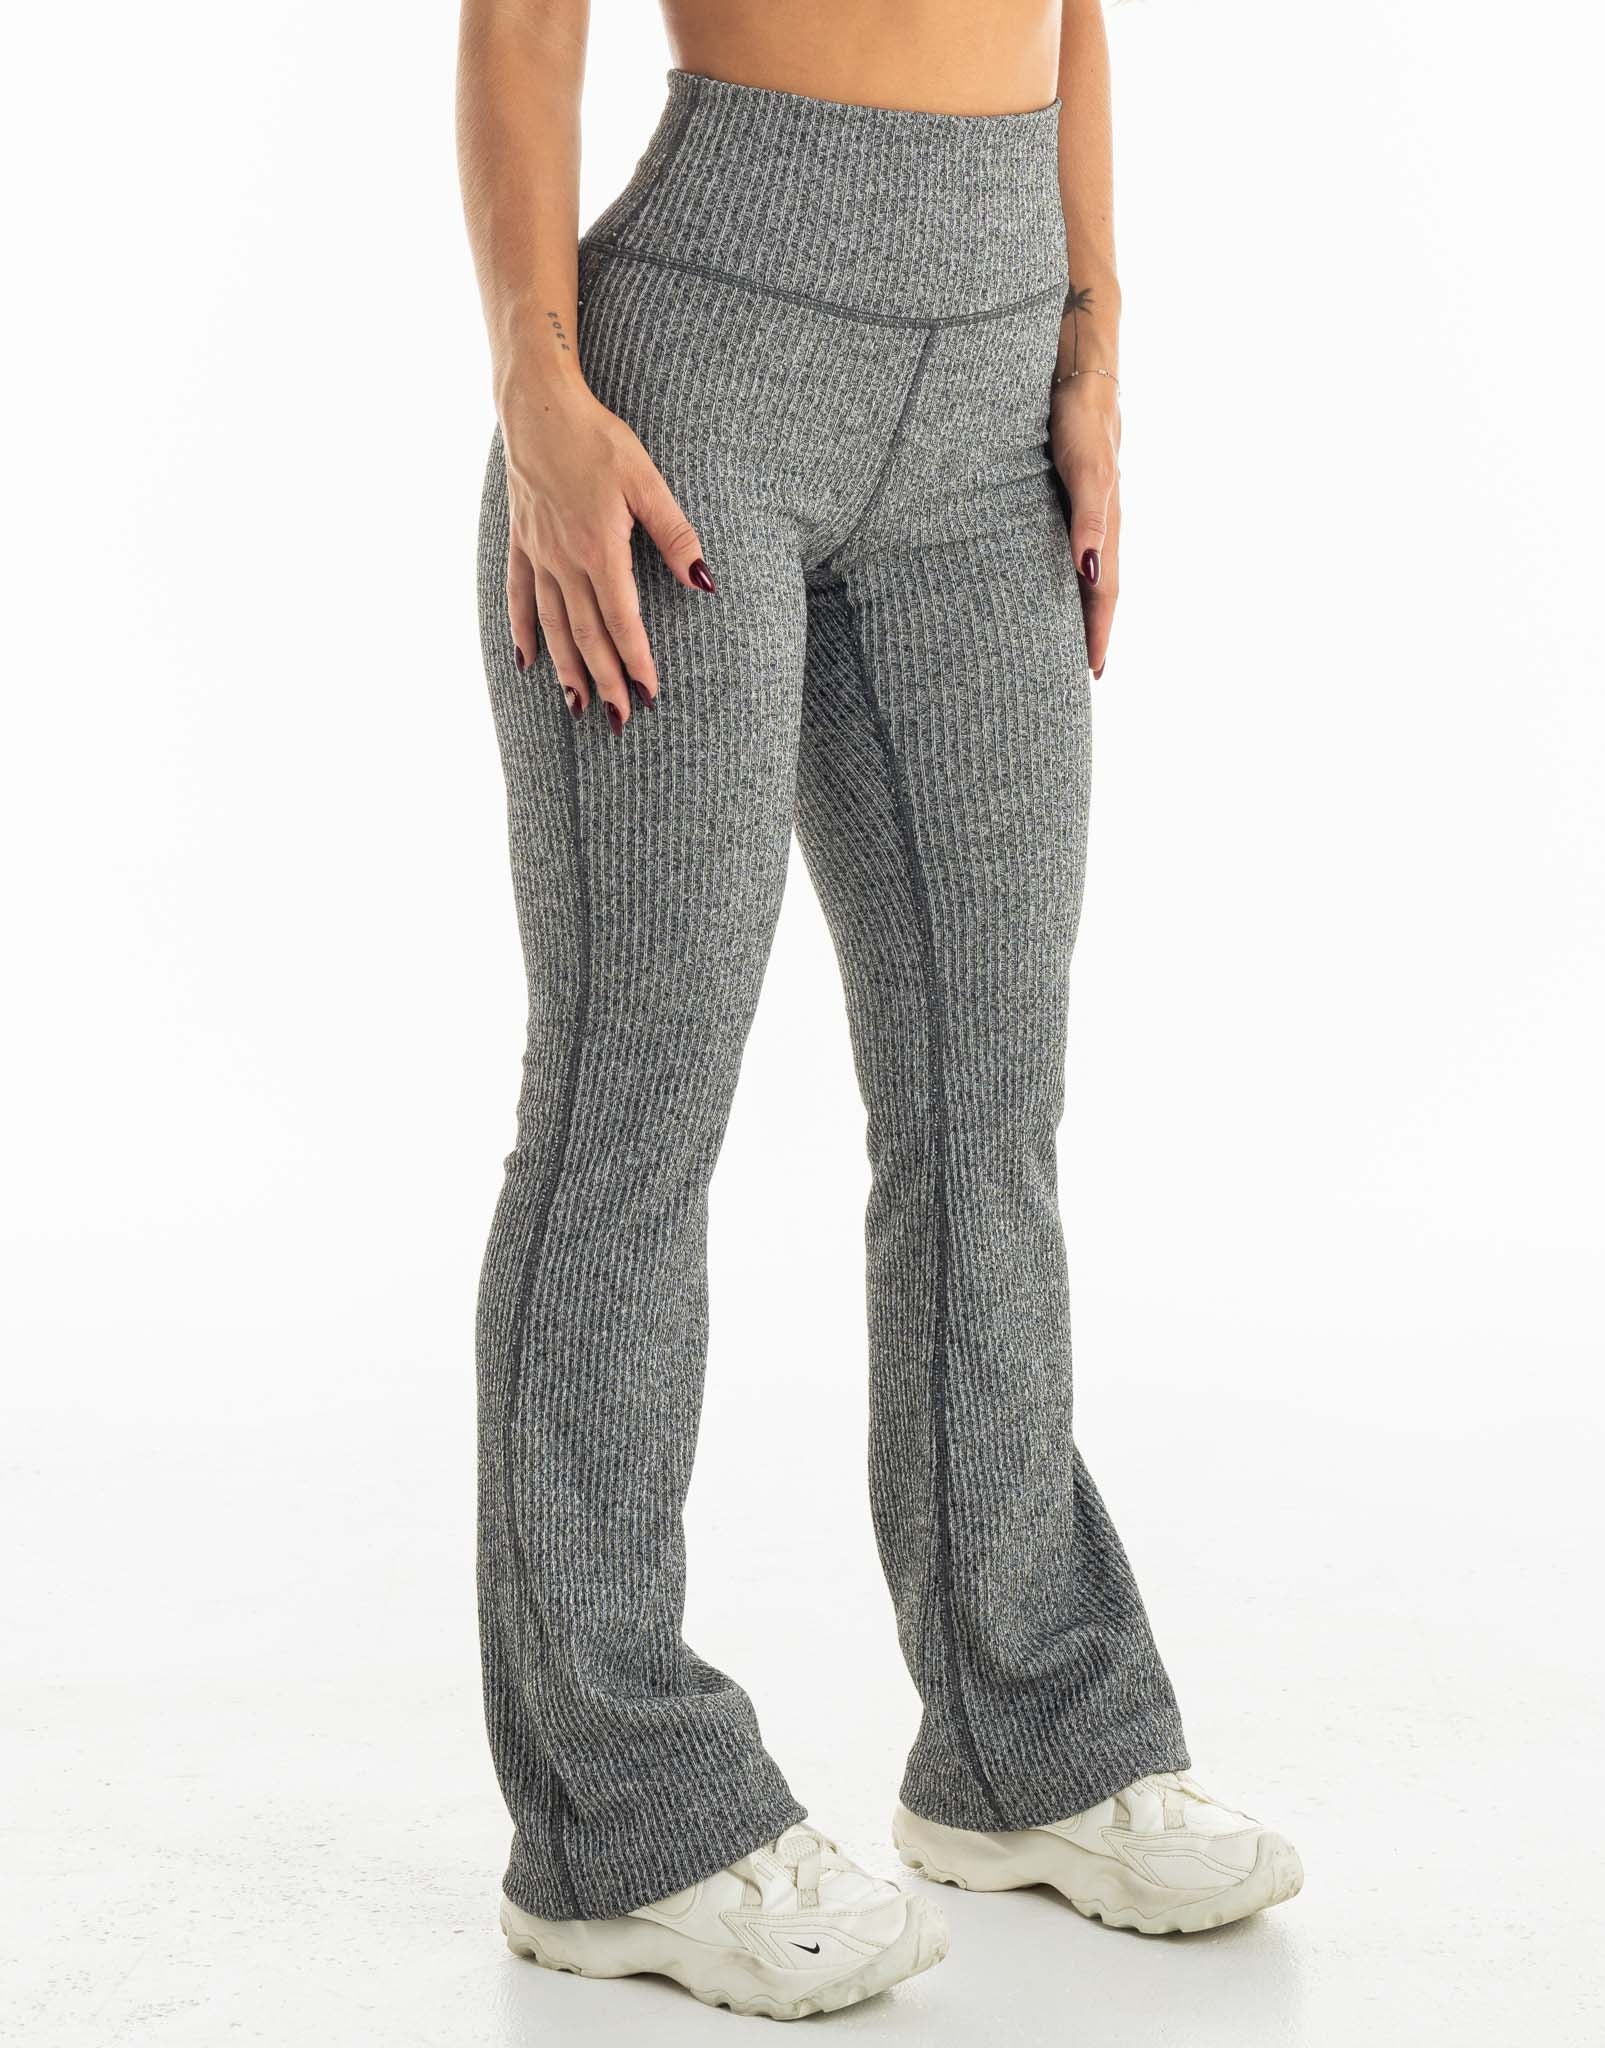 ECHT COMFORT FLARE PANTS (bell bottom leggings) Size XL - $35 (46% Off  Retail) New With Tags - From Eva